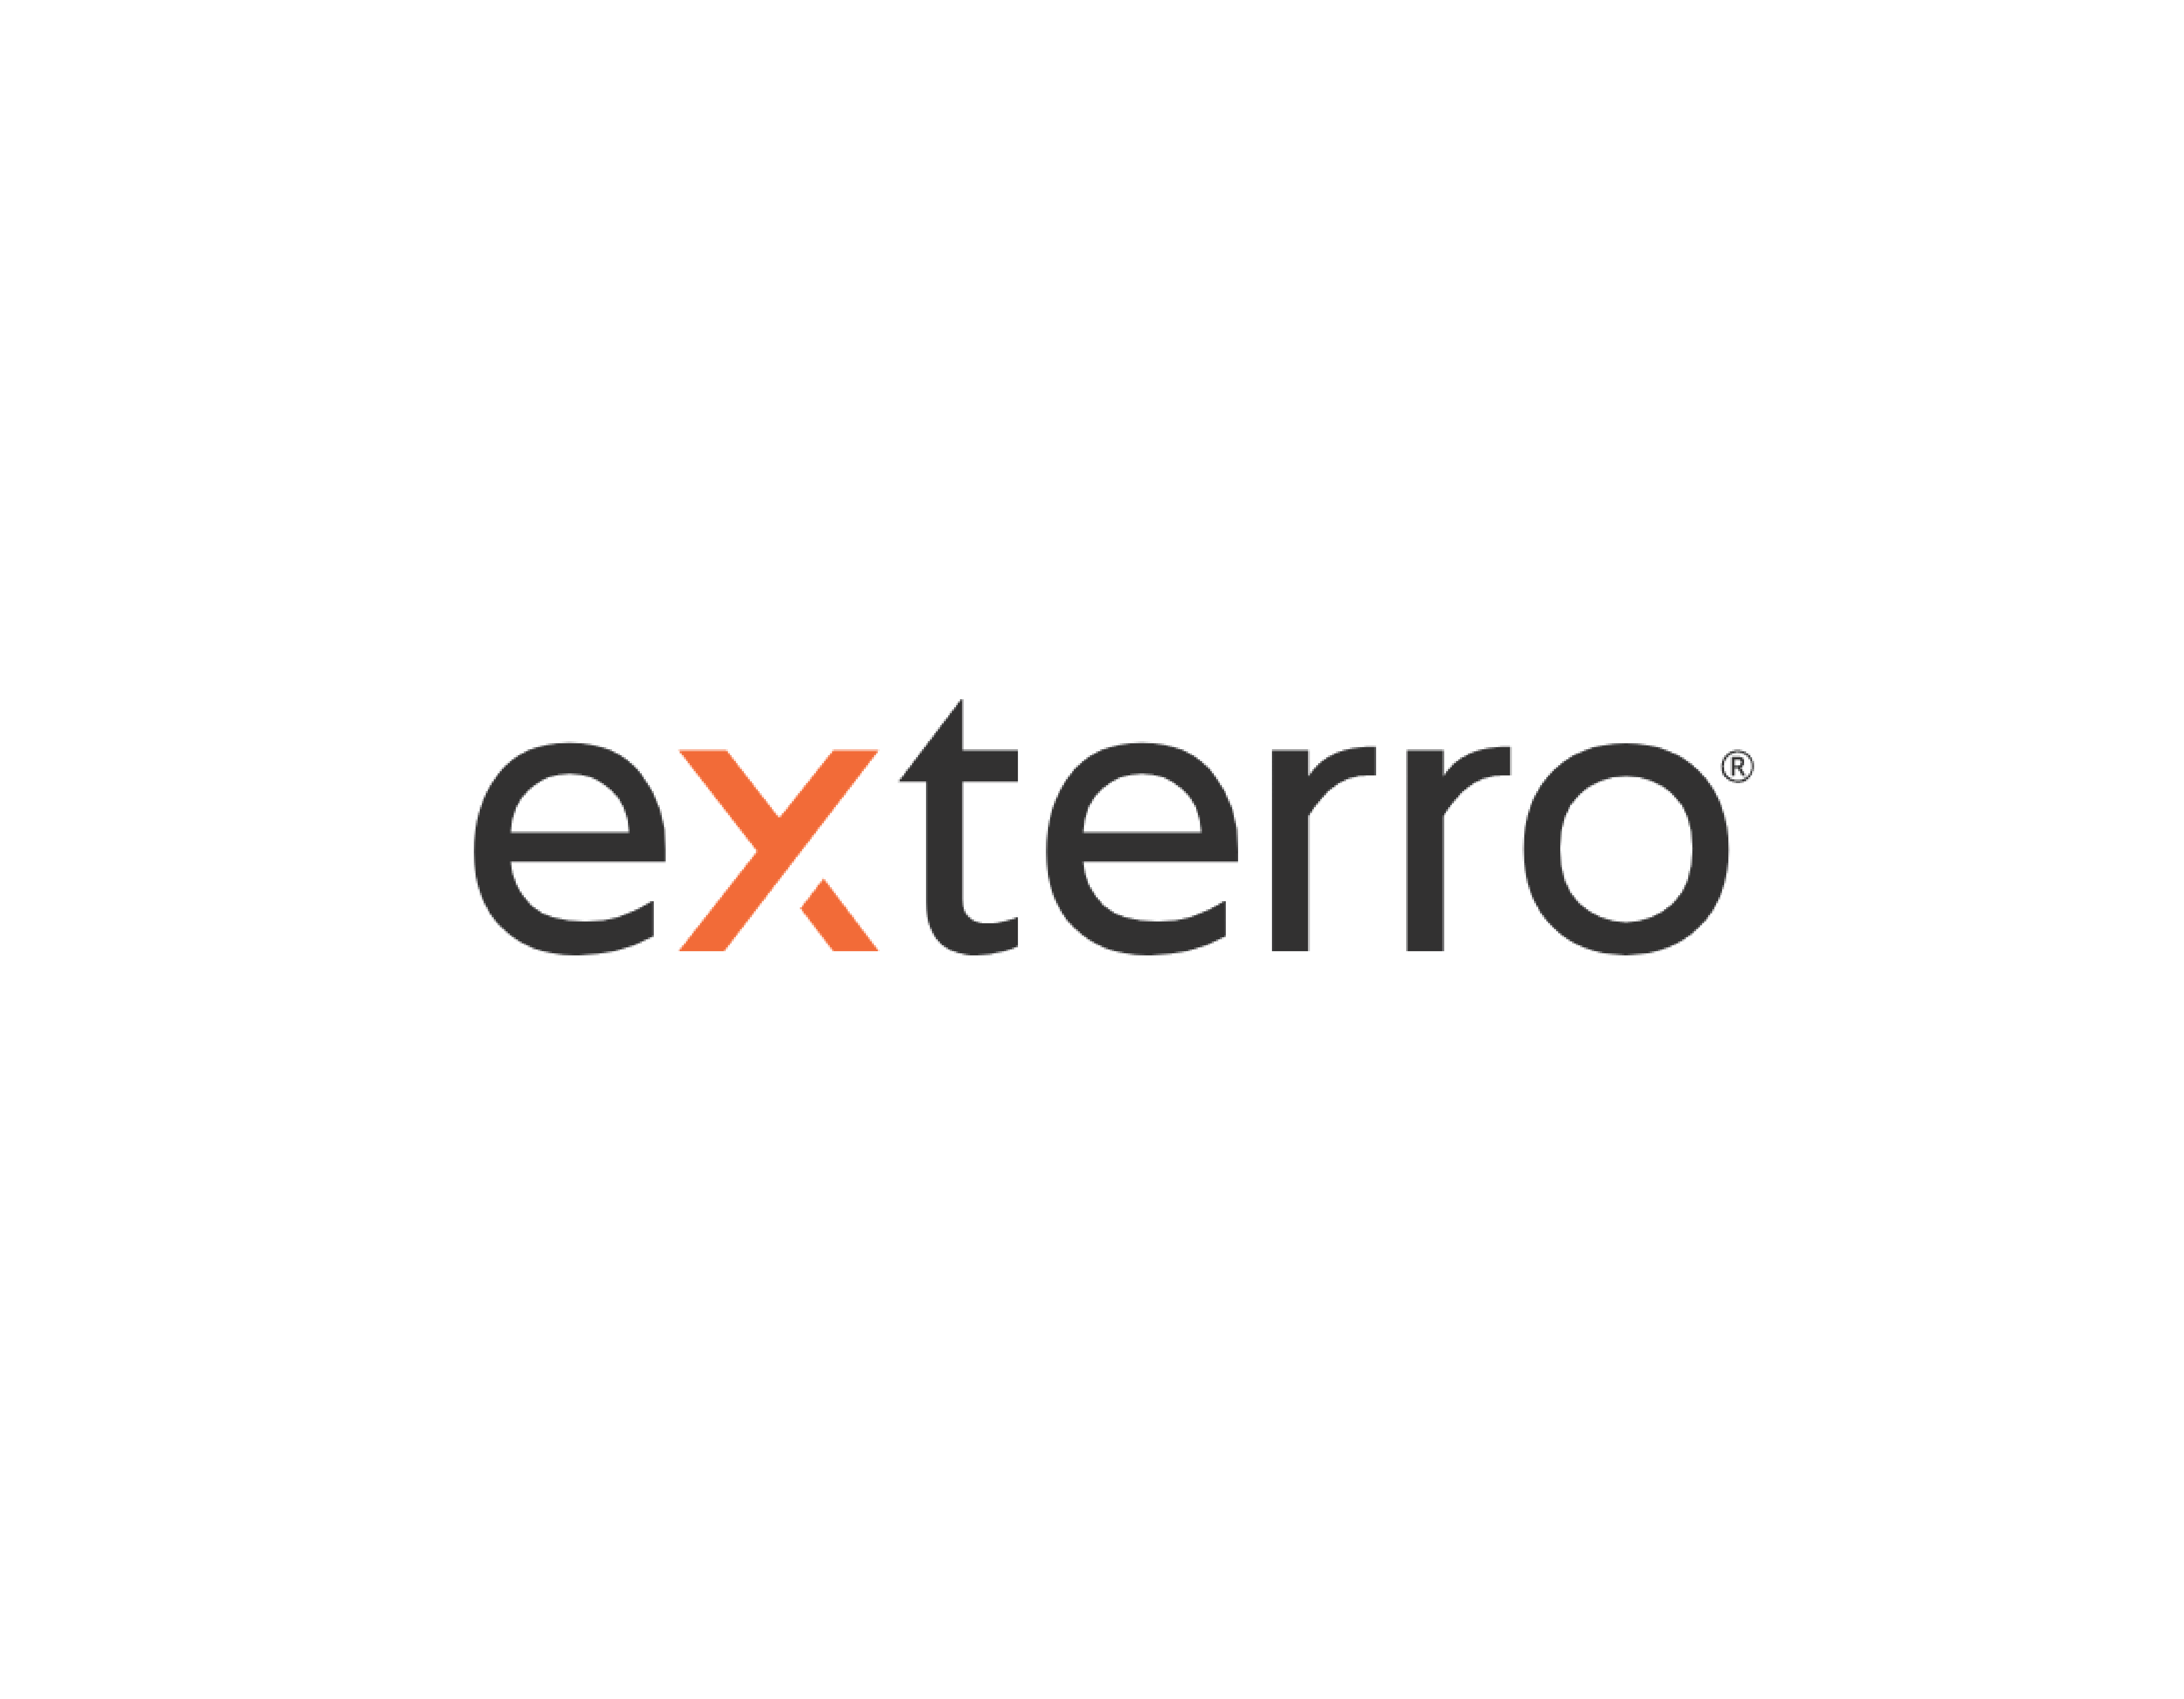 Exterro to showcase State-of-the-Art Digital Forensics, Legal Governance, Privacy and compliance Innovations at the International Police Expo 2022 in India